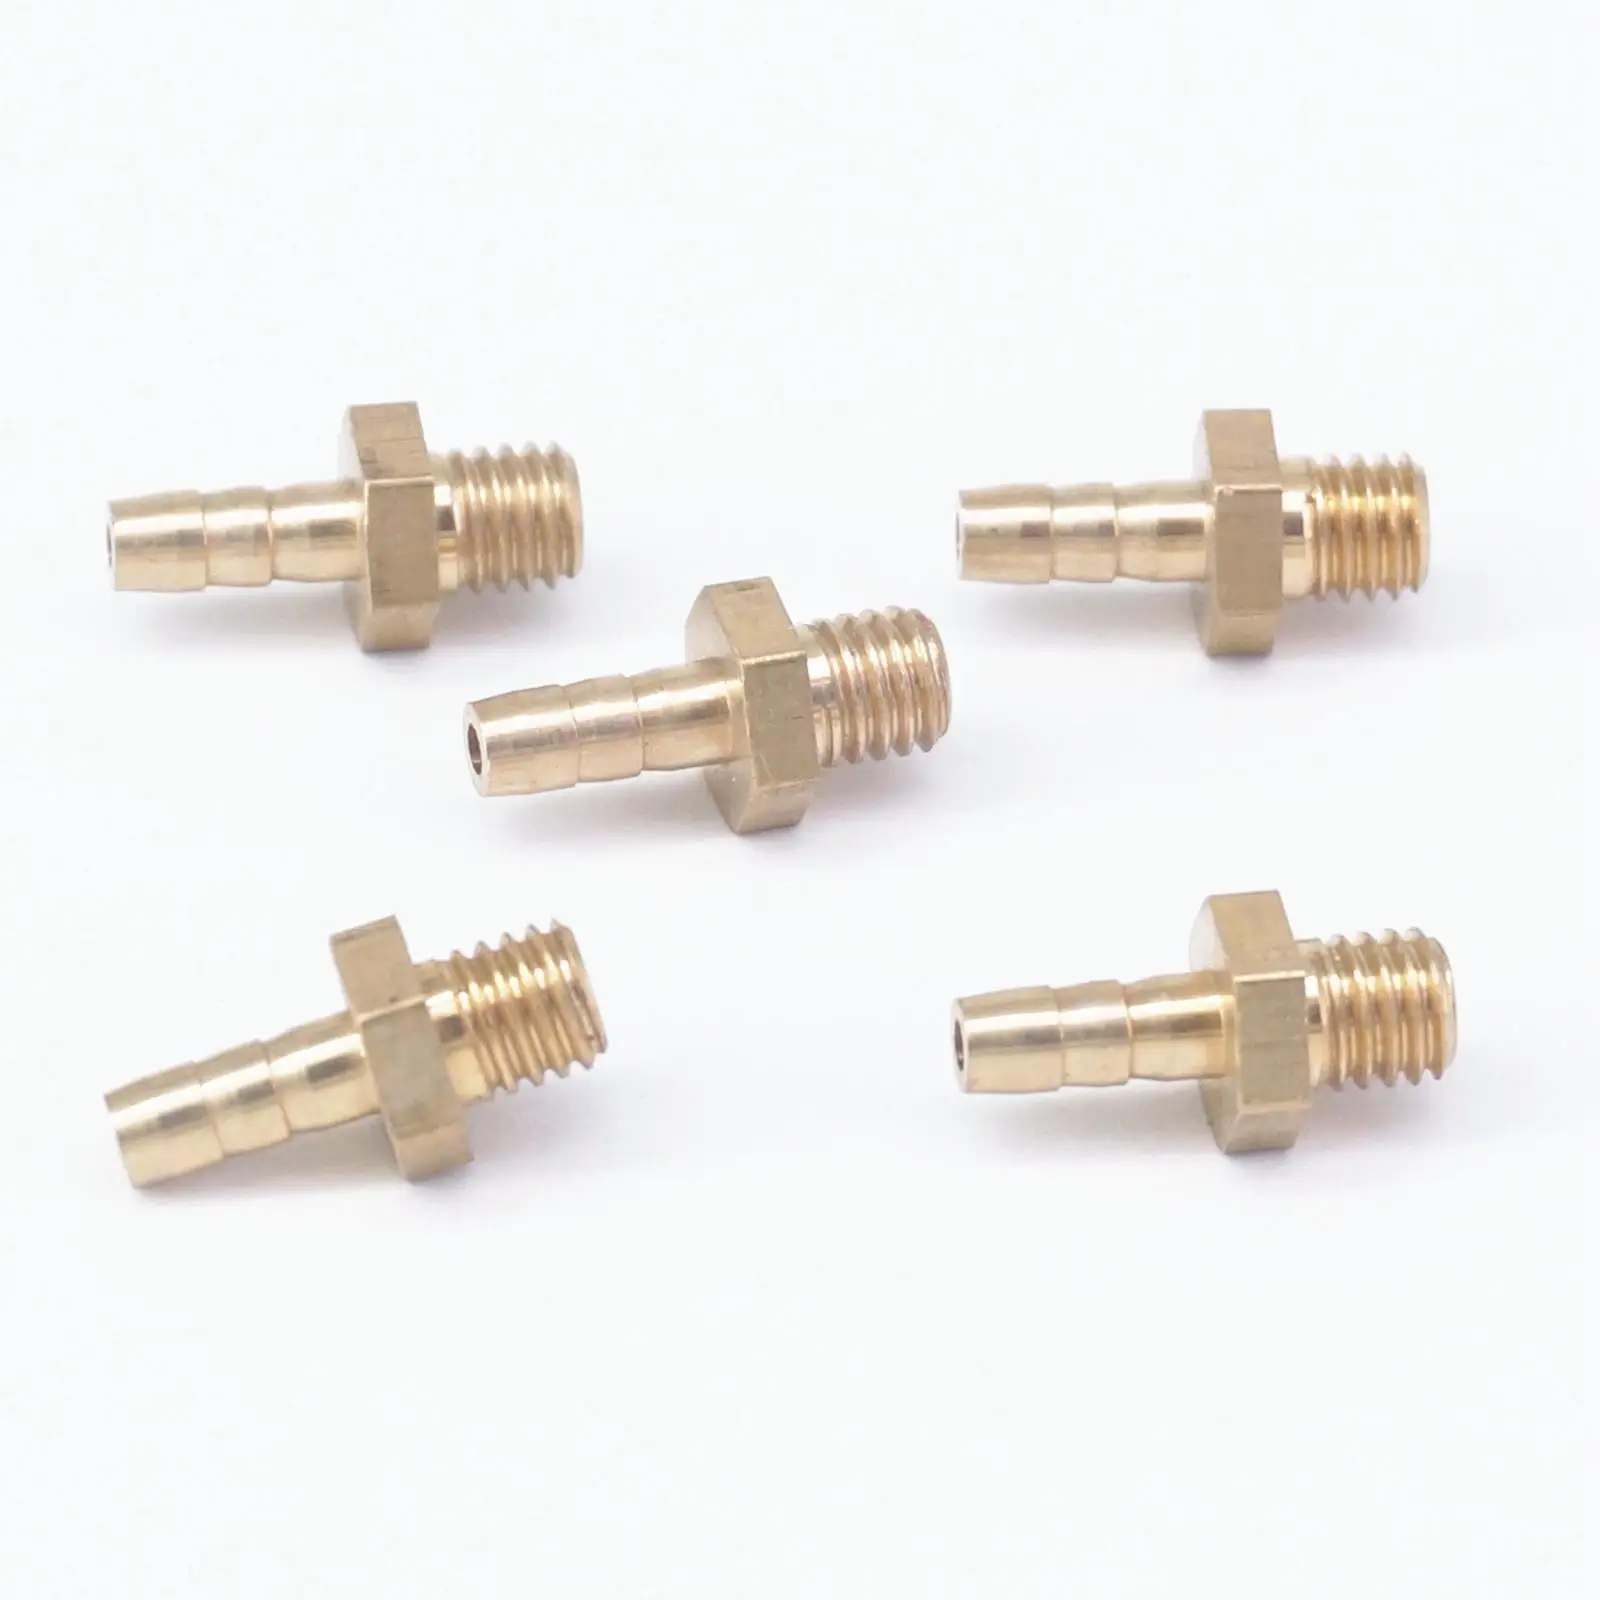 

LOT 5 Hose Barb I/D 3mm x M5 Metric Male Thread Brass coupler Splicer Connector Fitting for Fuel Gas Water